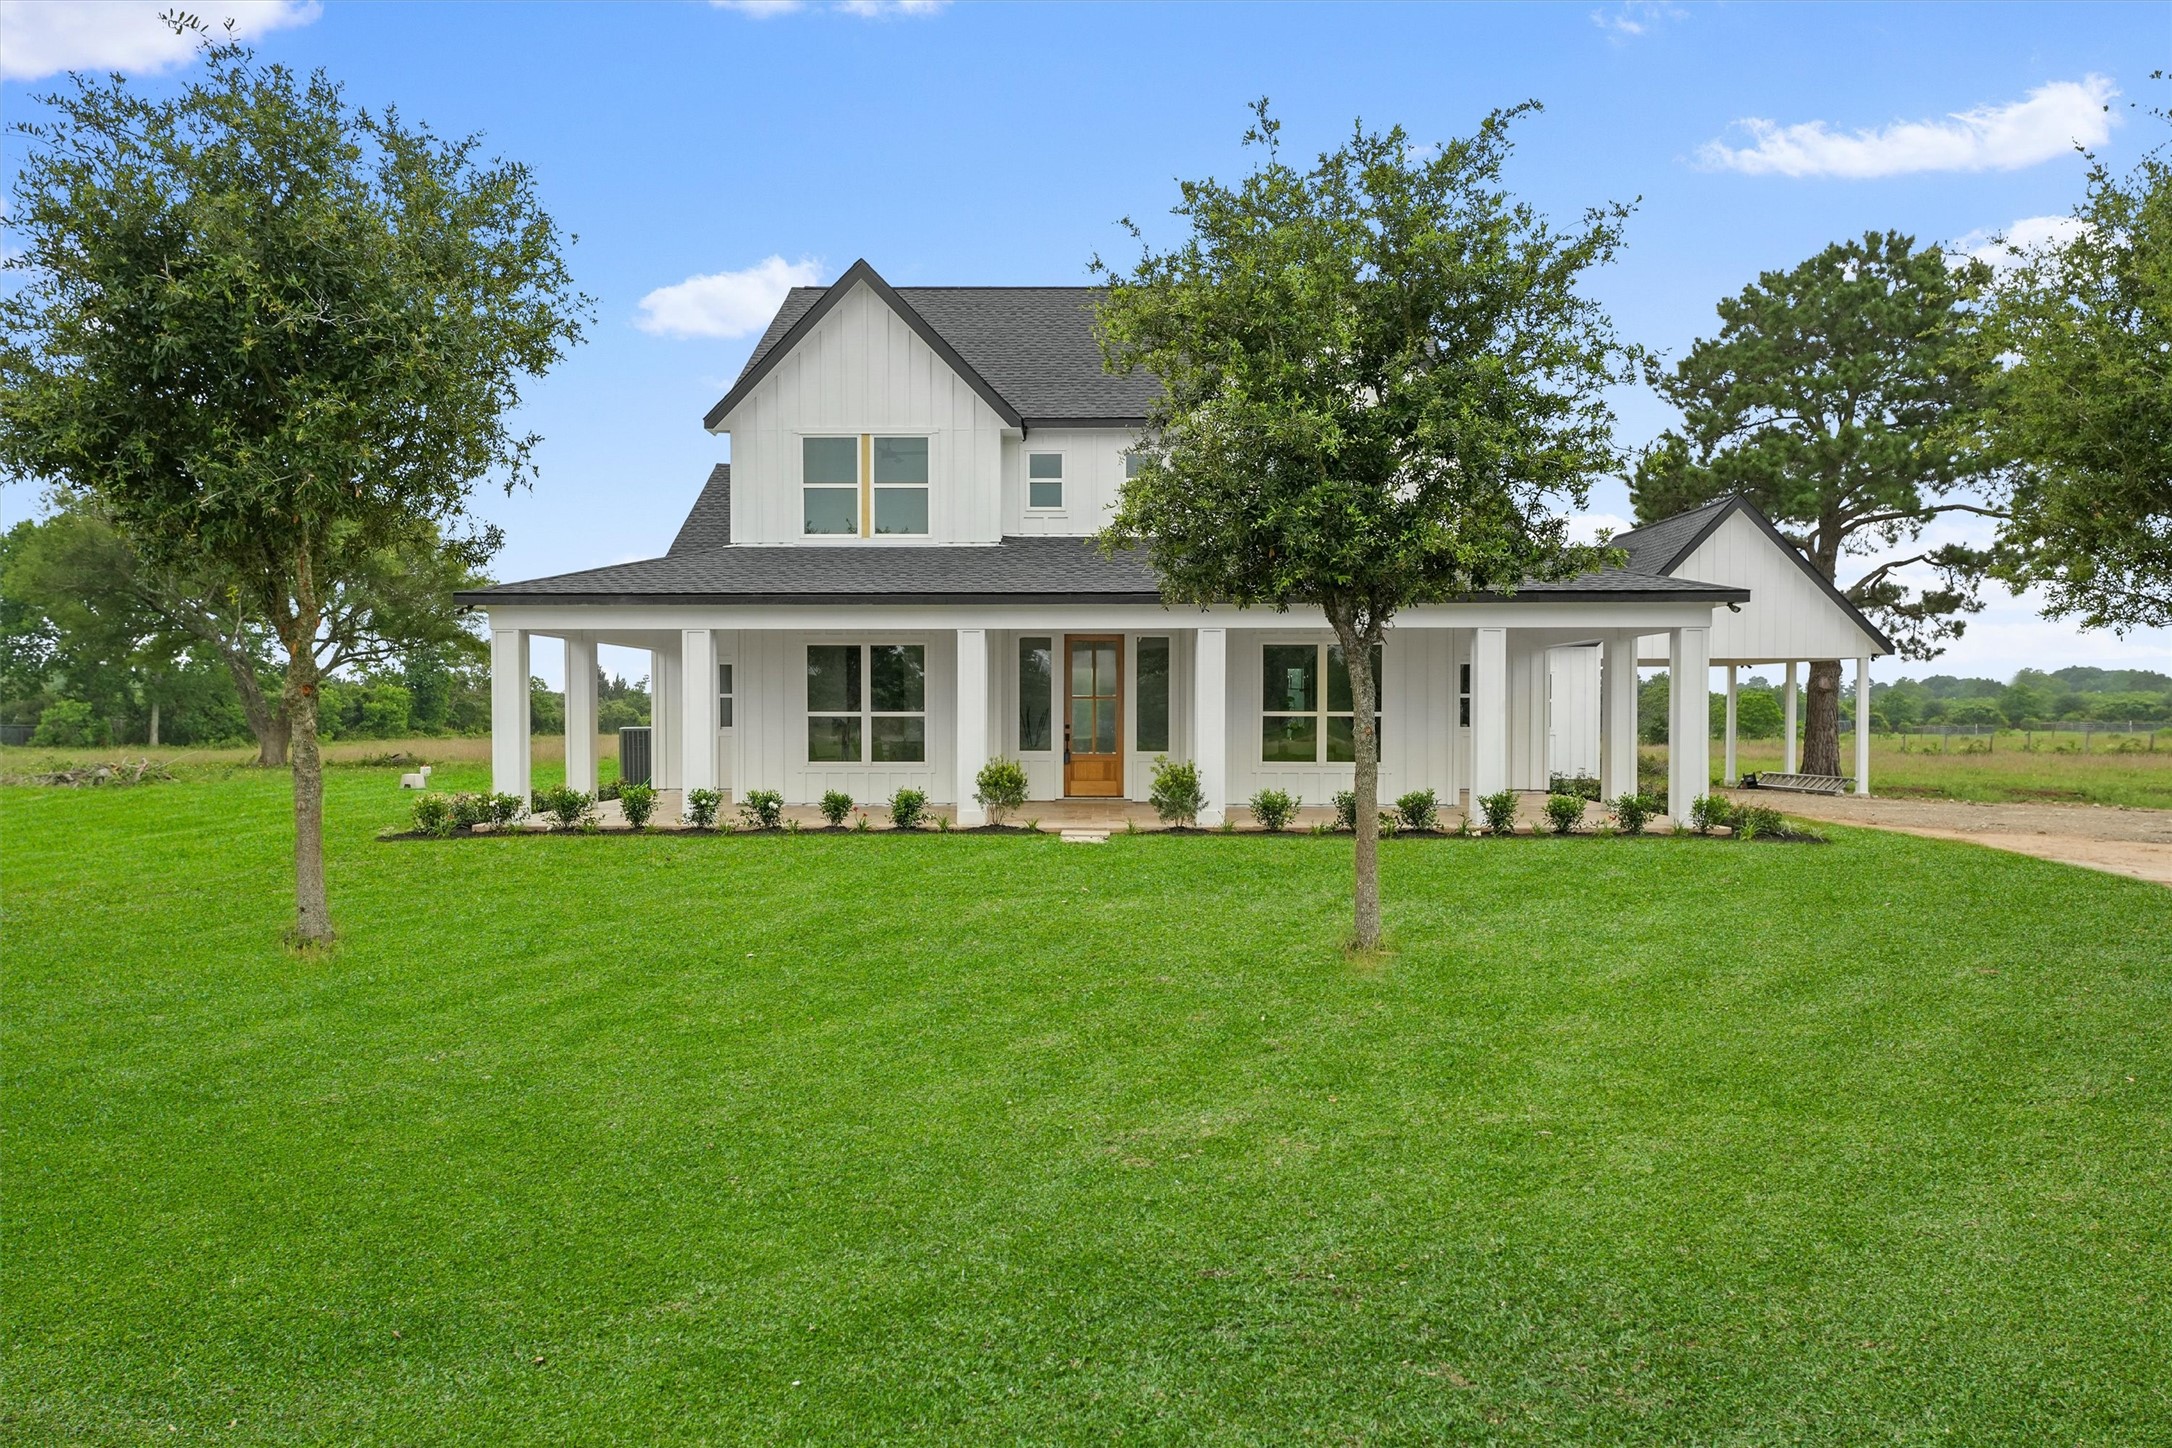 Front view of this beautiful modern farmhouse